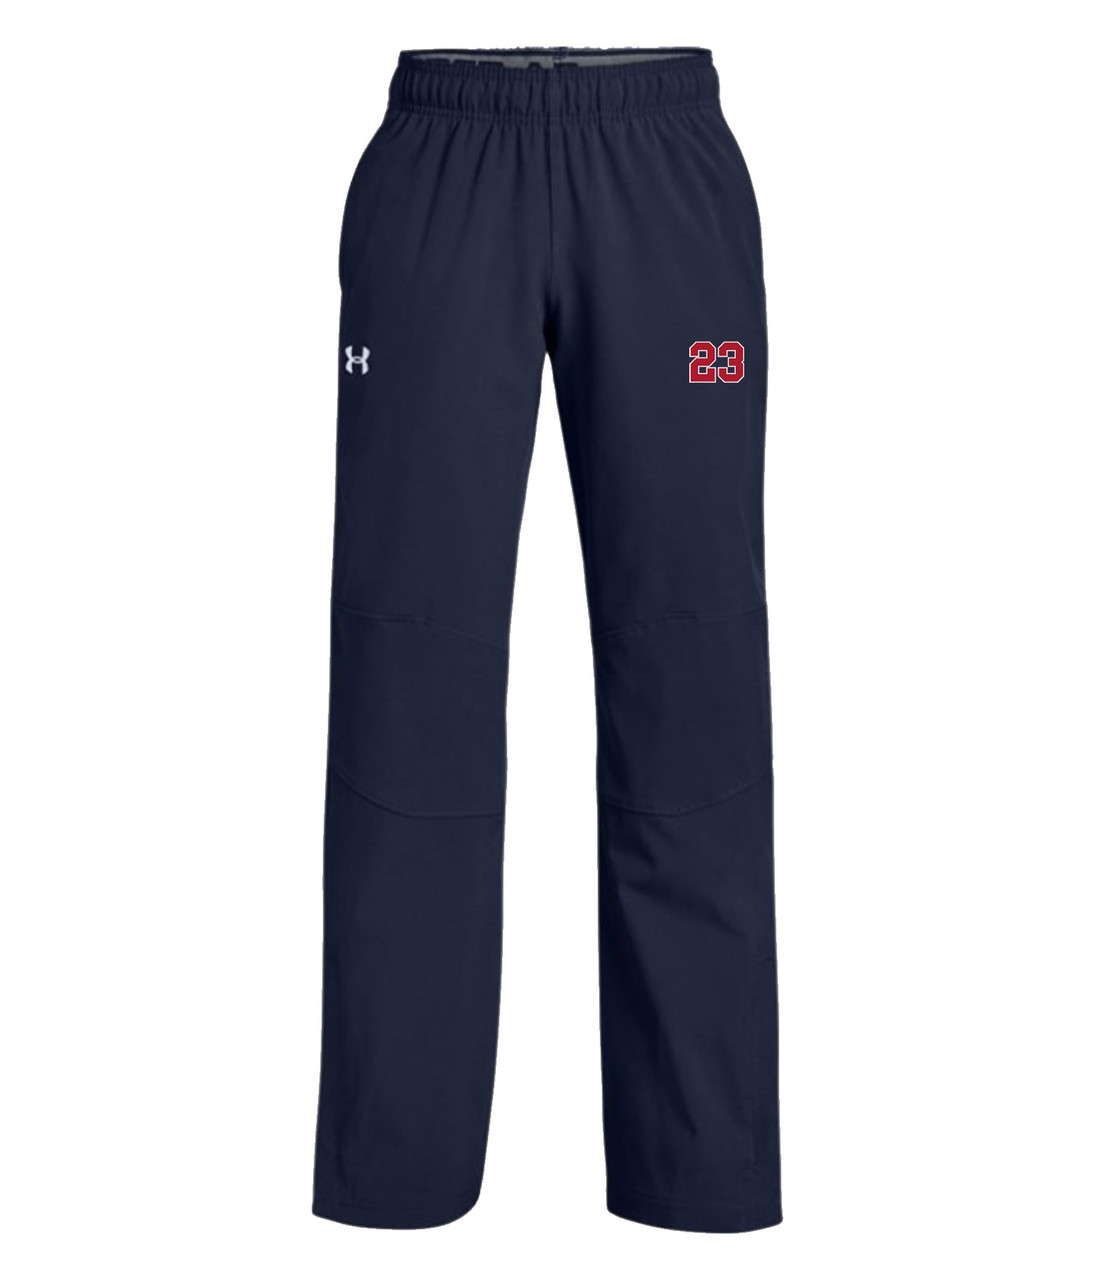 GMHA Blaze Youth Track Pant - NRG Active Apparel Incorporated.